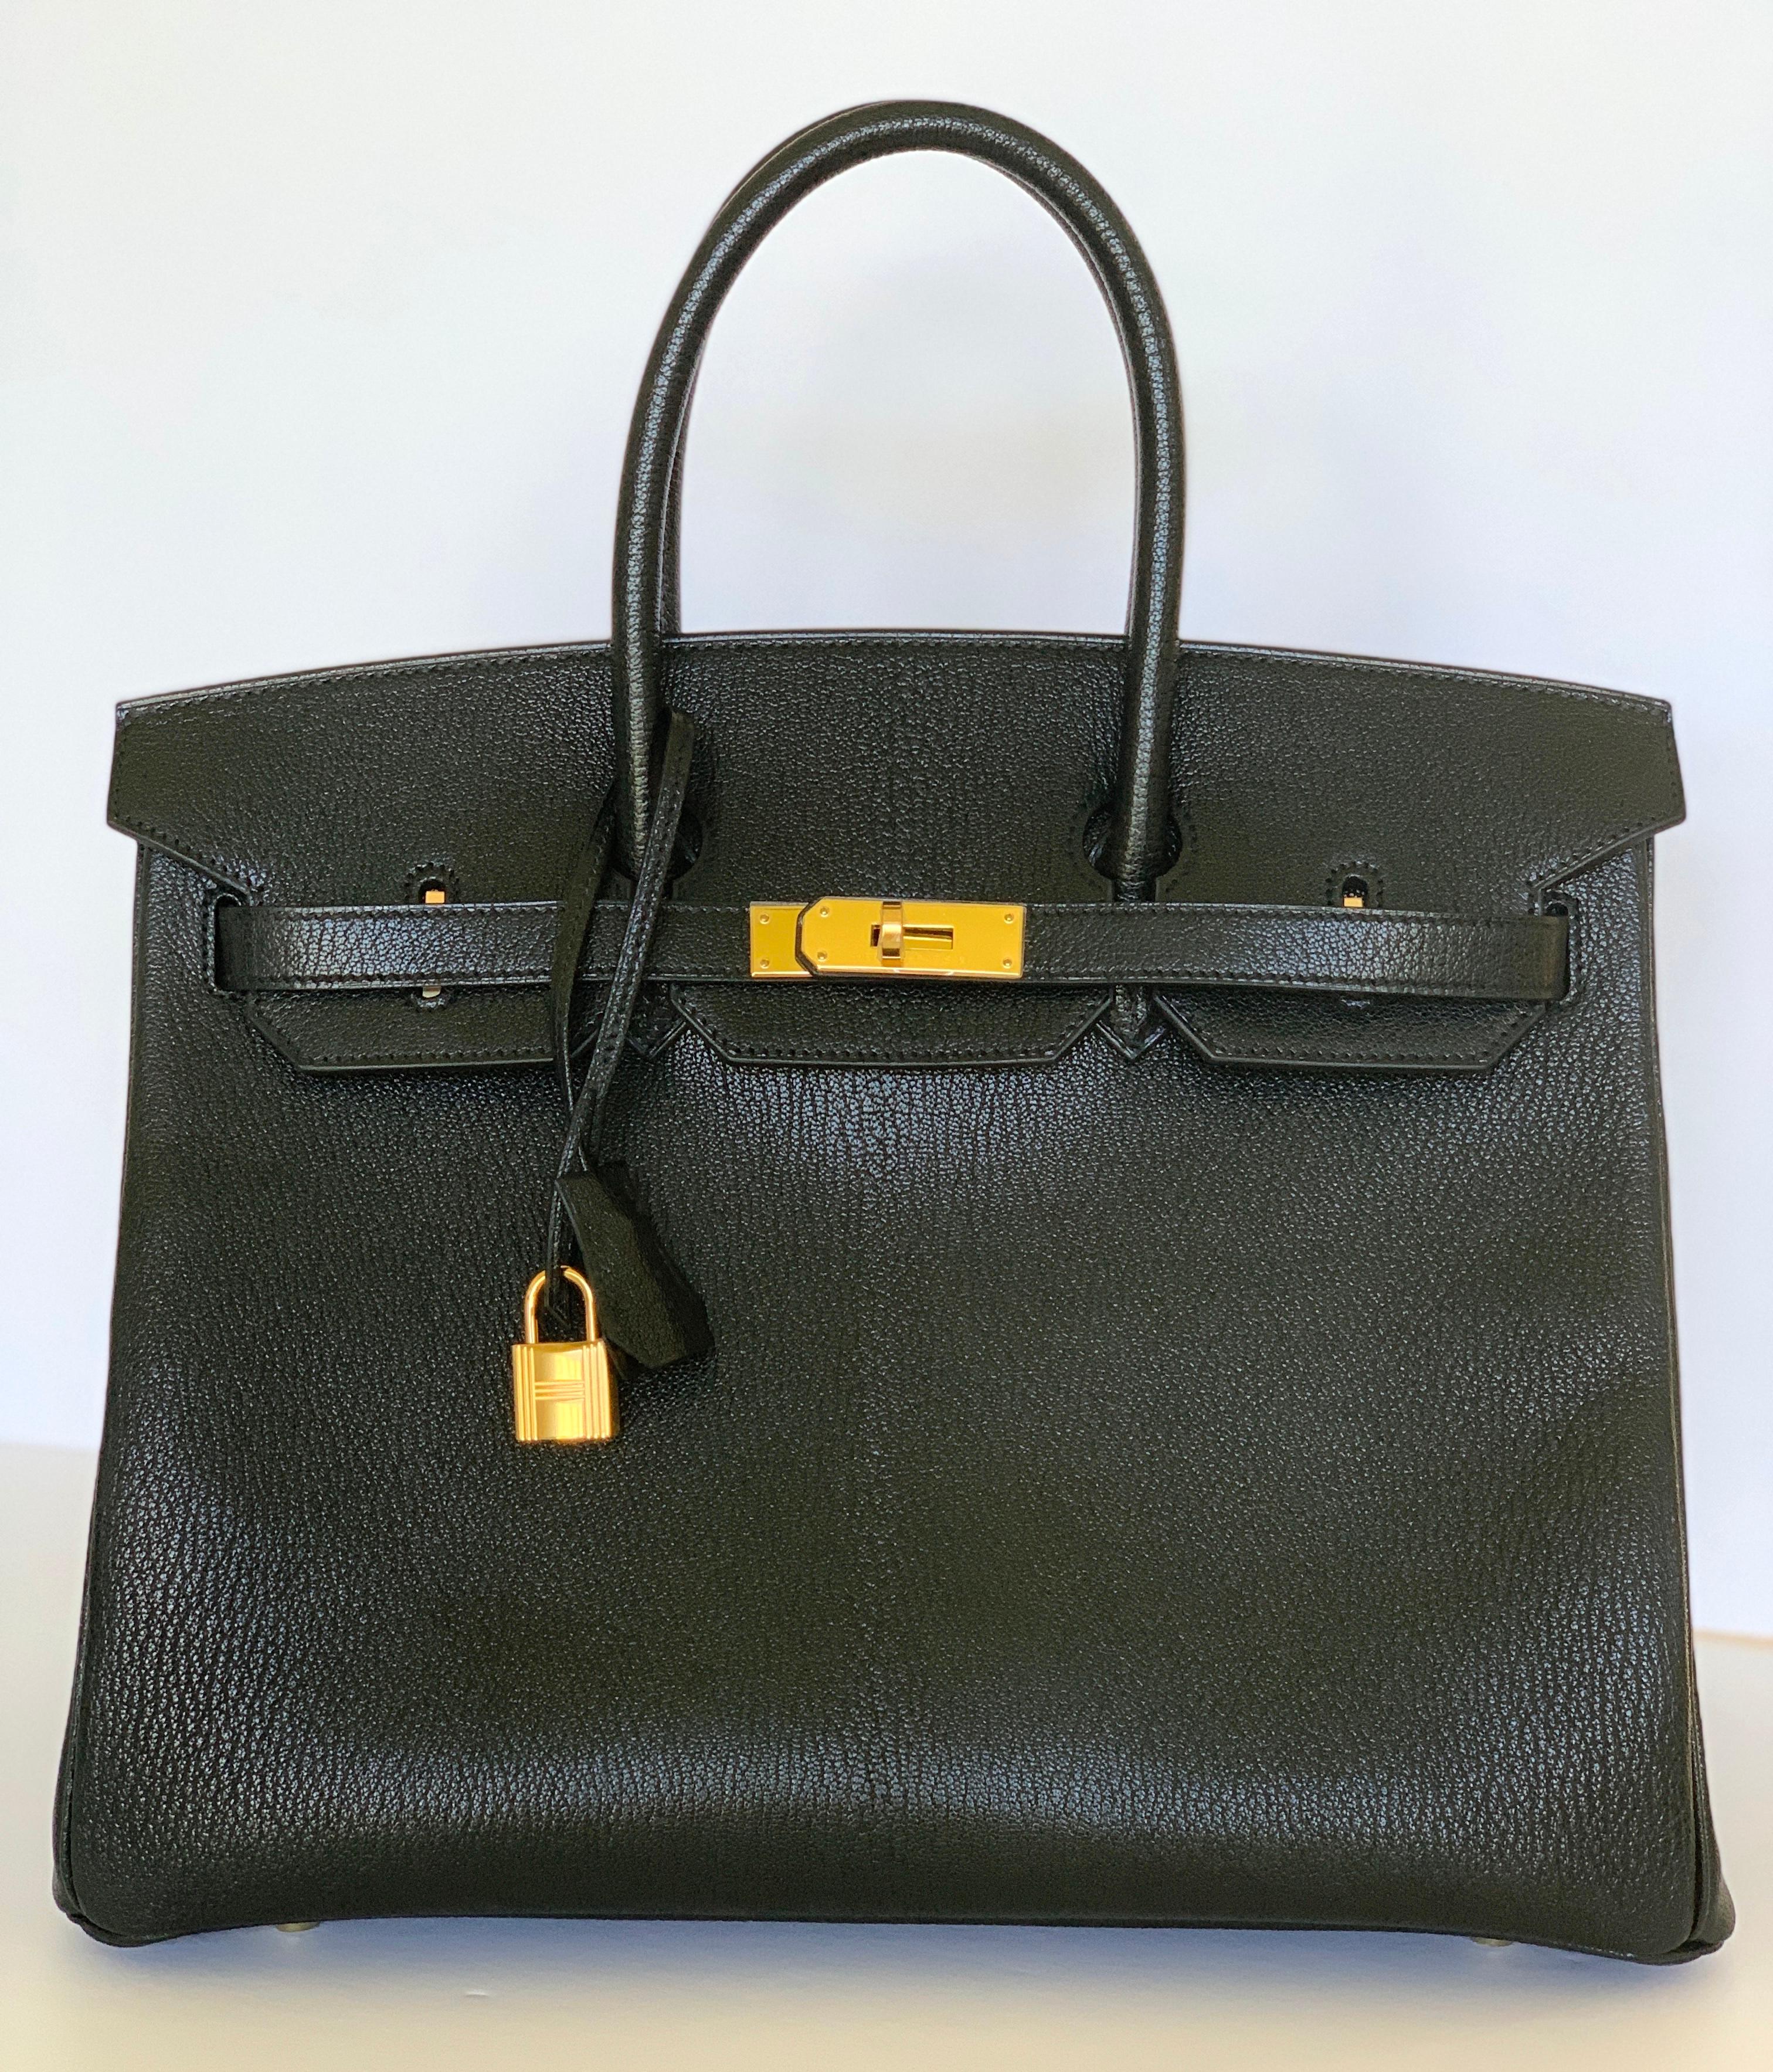 Hermes RARE Birkin 35 Chèvre de Coromandel one of the most coveted Hermès leathers. 
It’s sourced from male mountain goats, which gives the leather a resilience that differentiates it from others offered by Hermès. It is distinguished by its